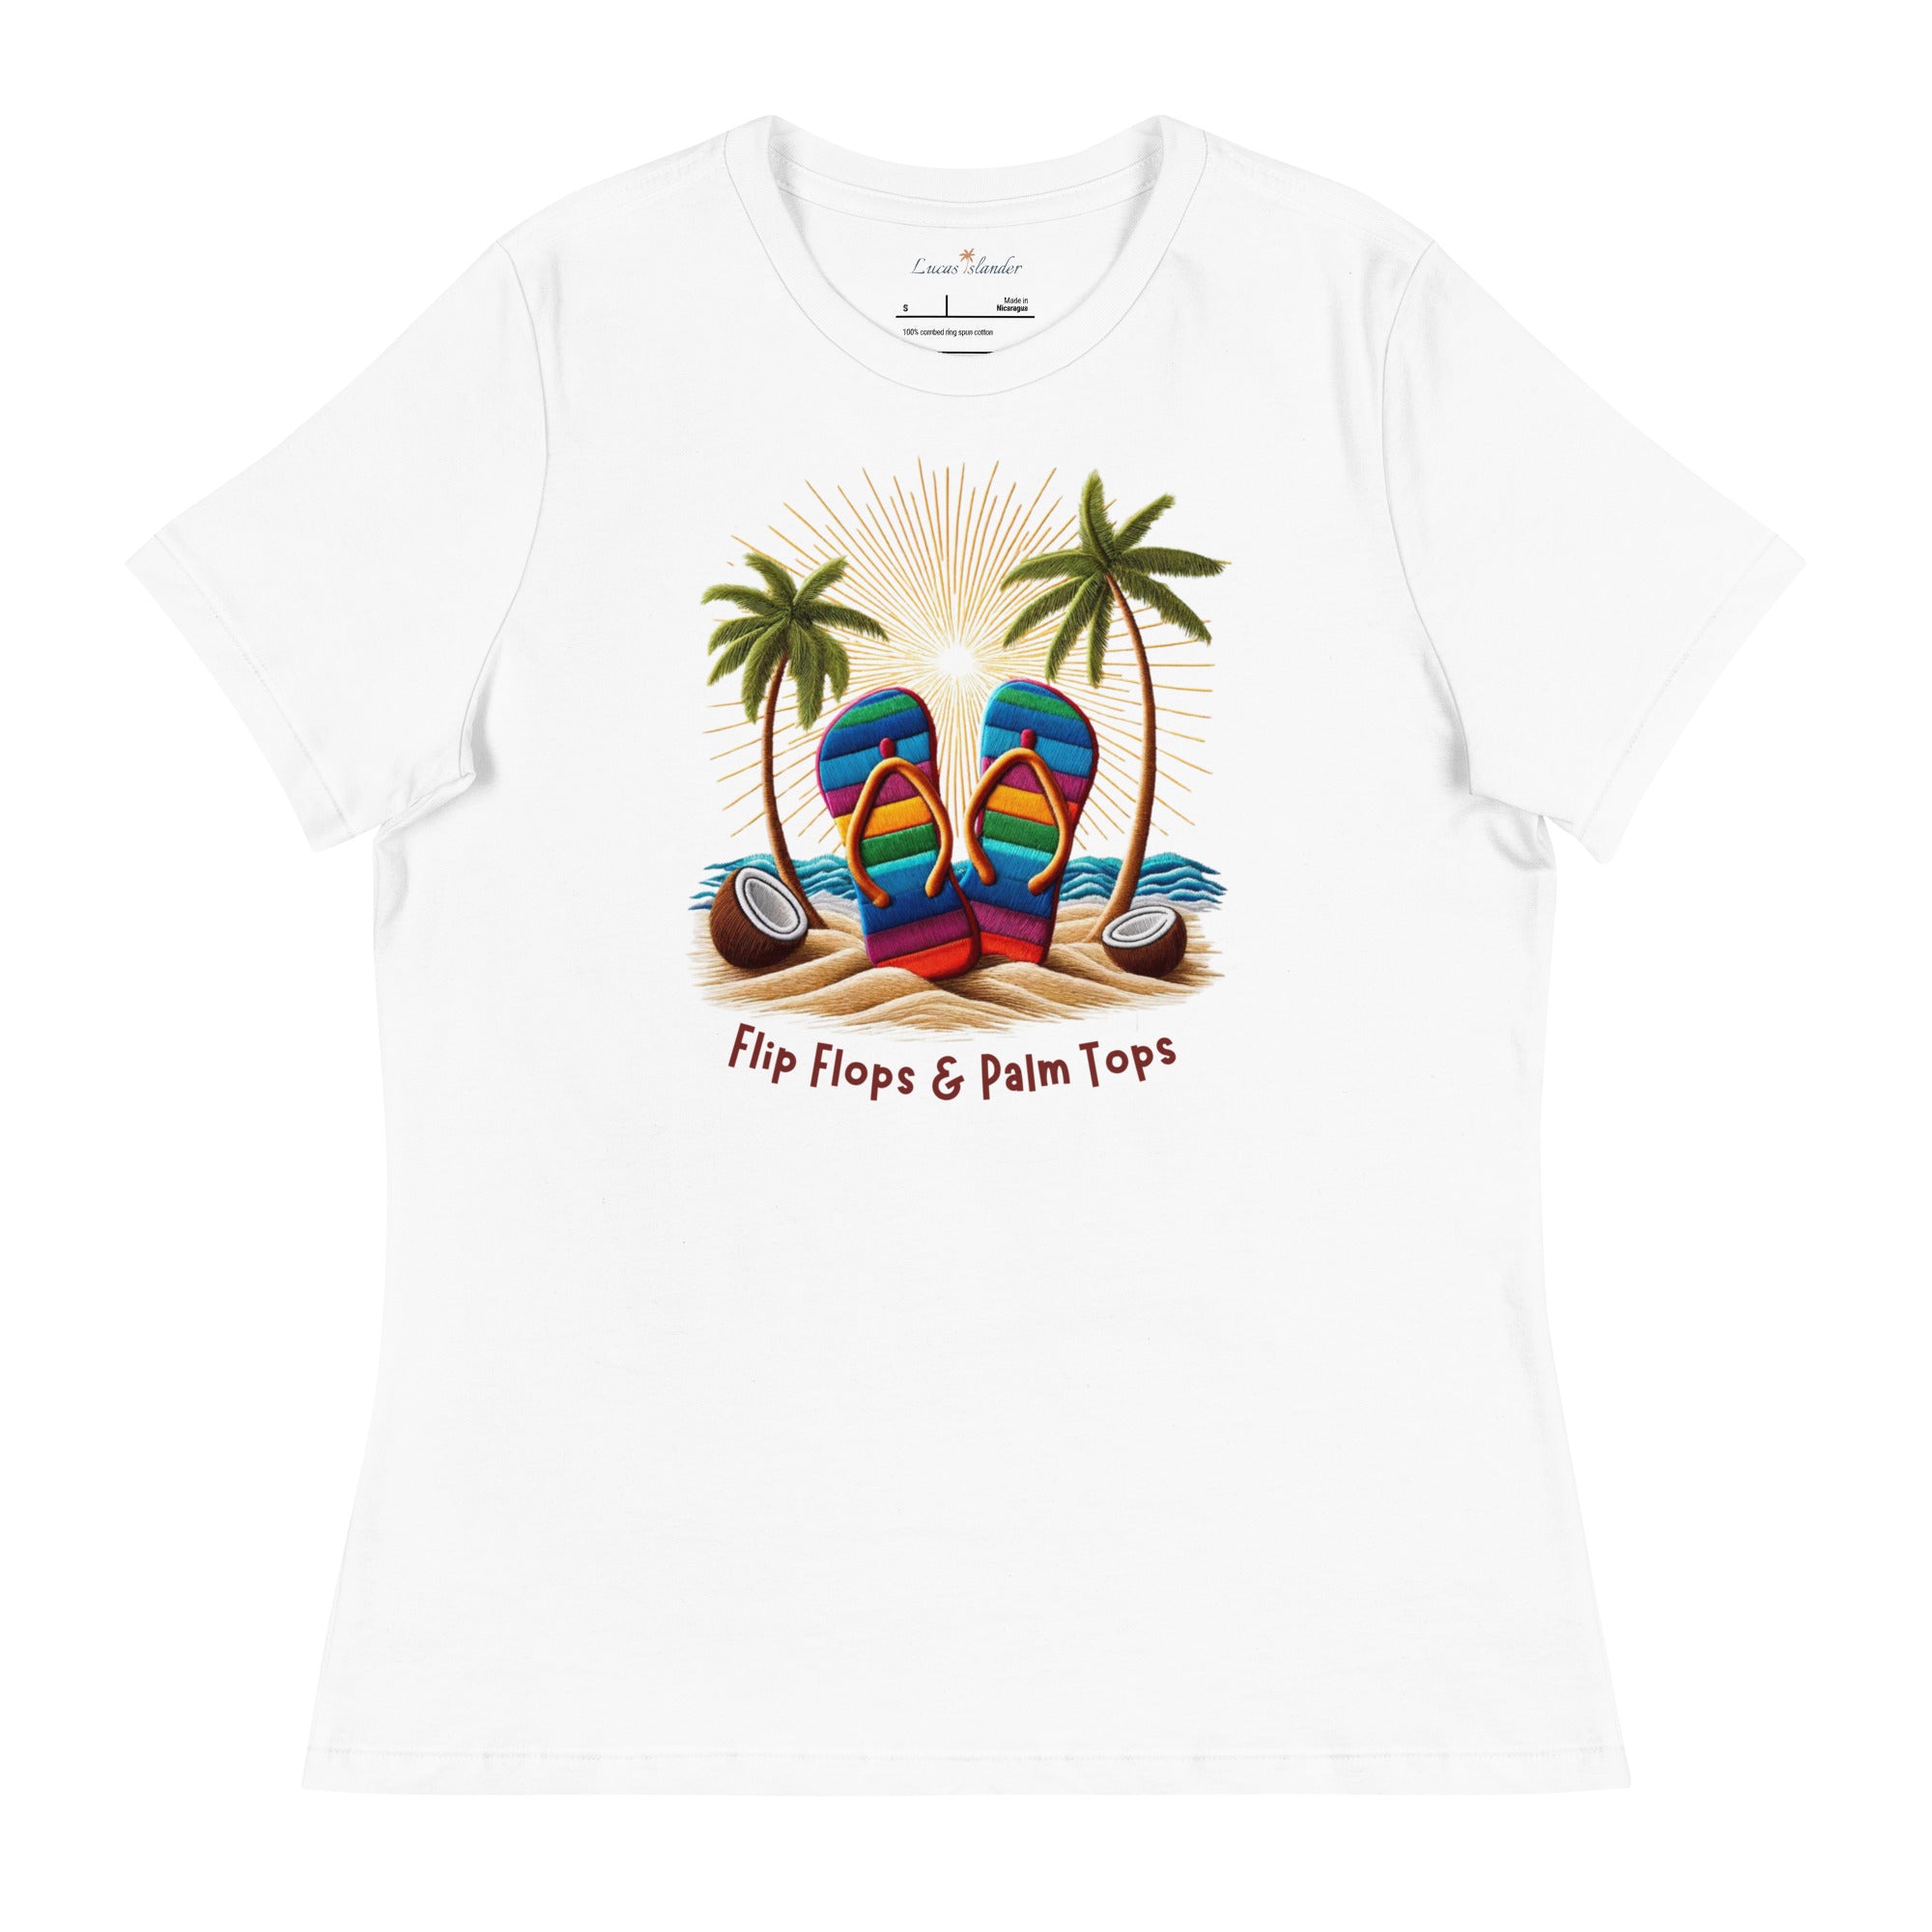 Experience Everyday Luxury with the Flip Flops & Palm Tops Women's Tee